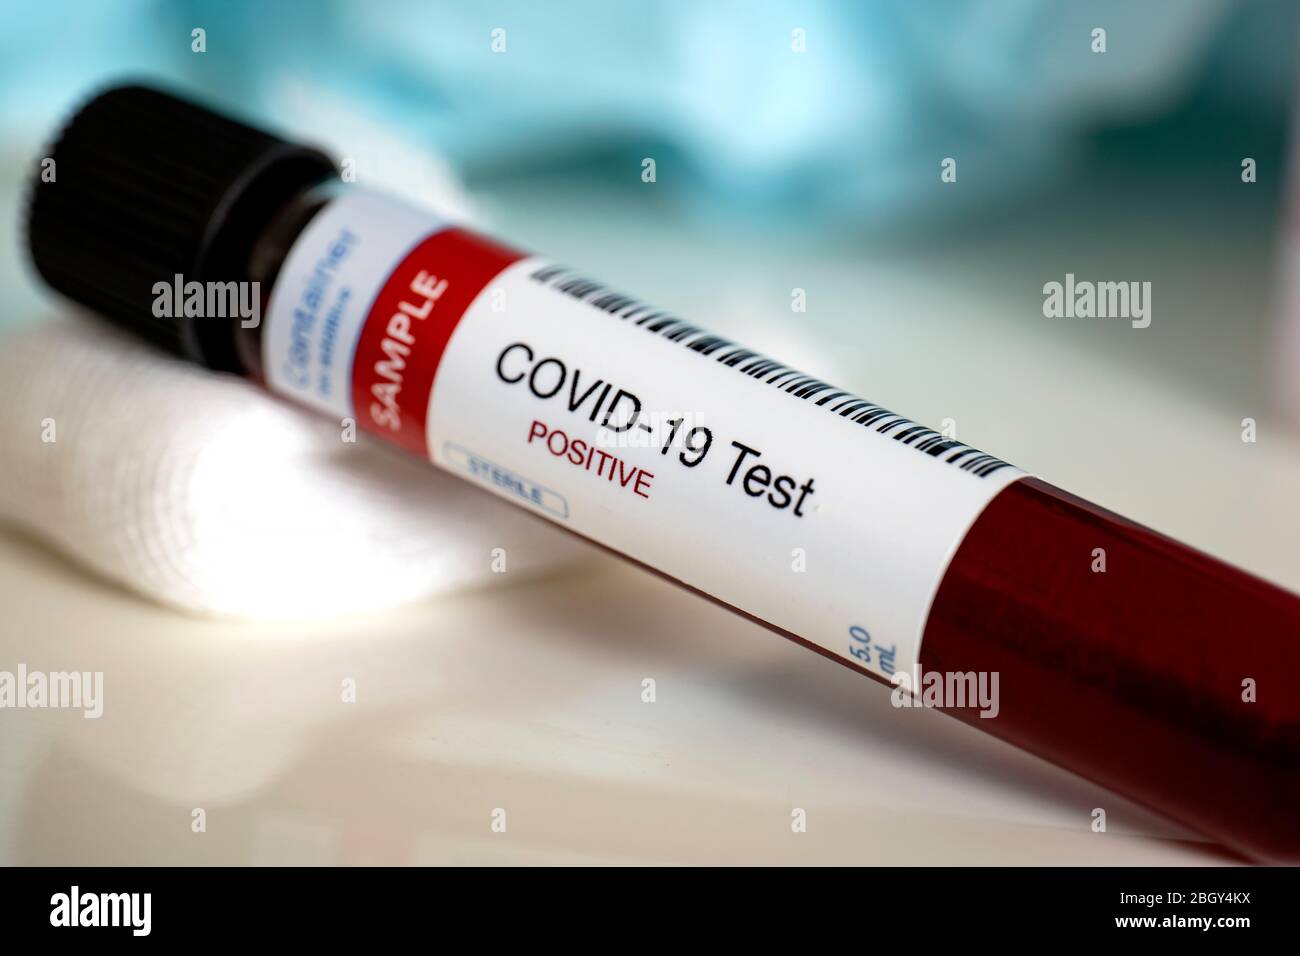 Blood test samples for presence of coronavirus (COVID-19) tube containing a blood sample that has tested positive for coronavirus. Stock Photo